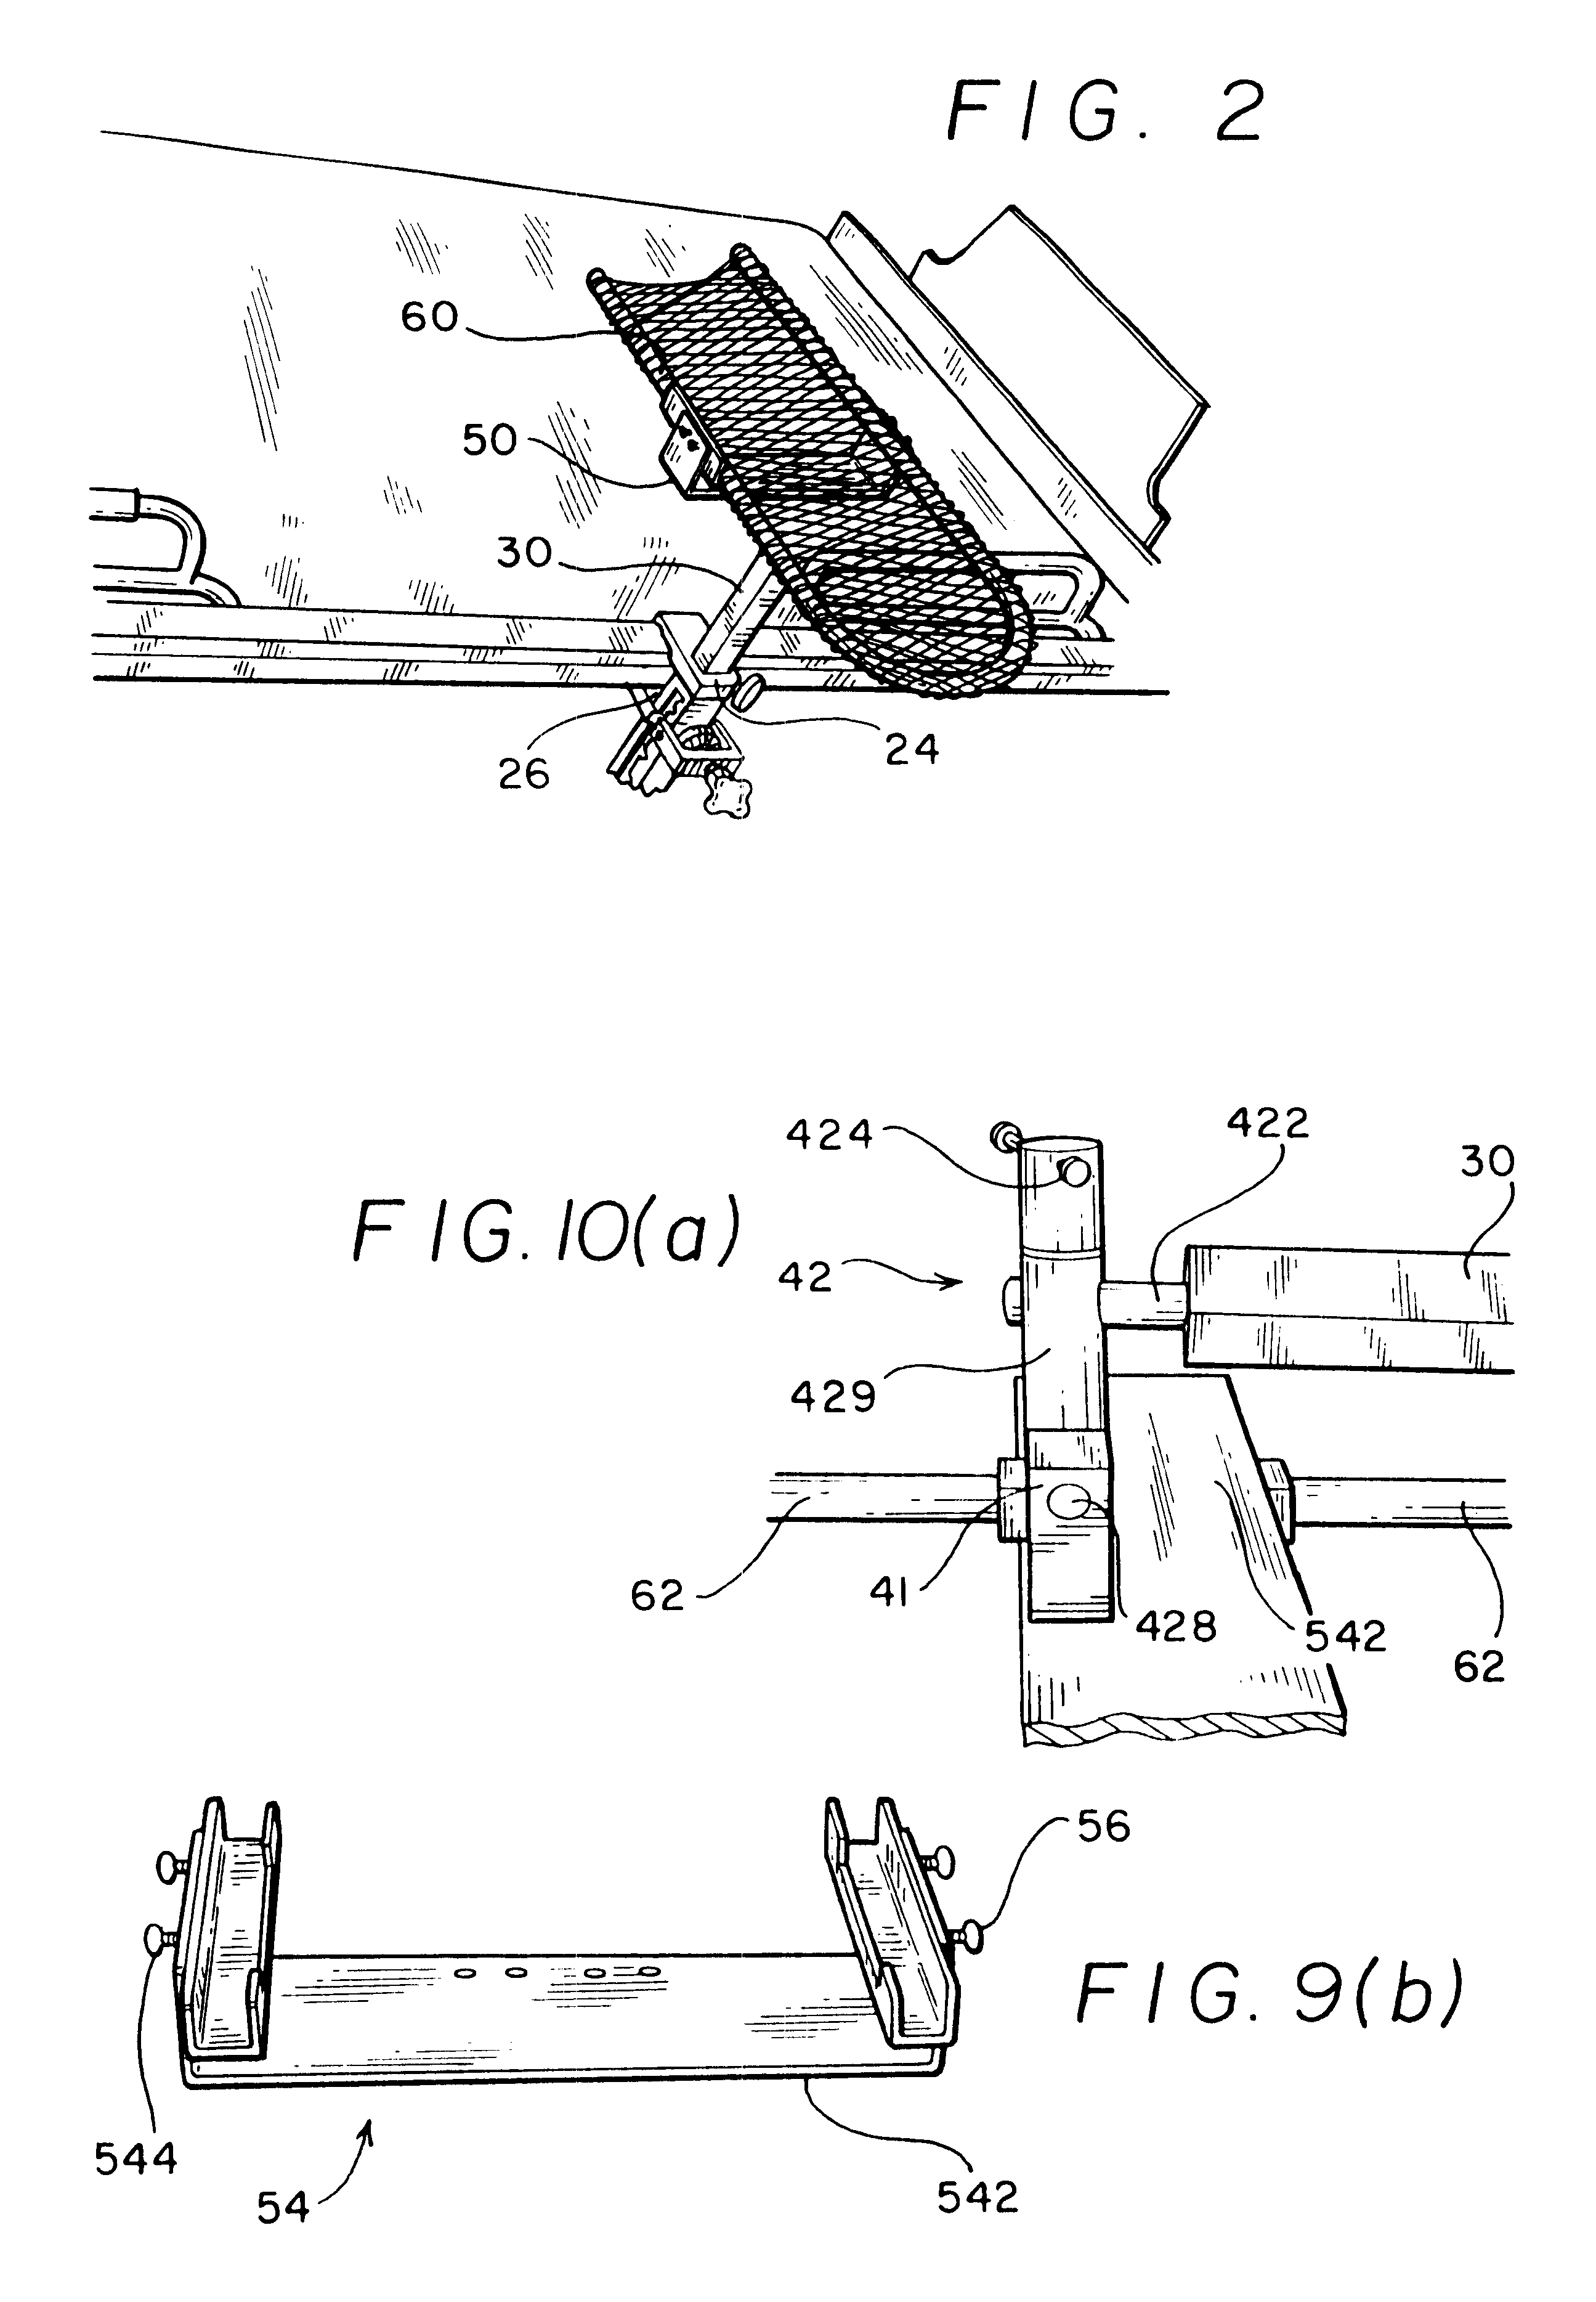 Device for upper extremity elevation